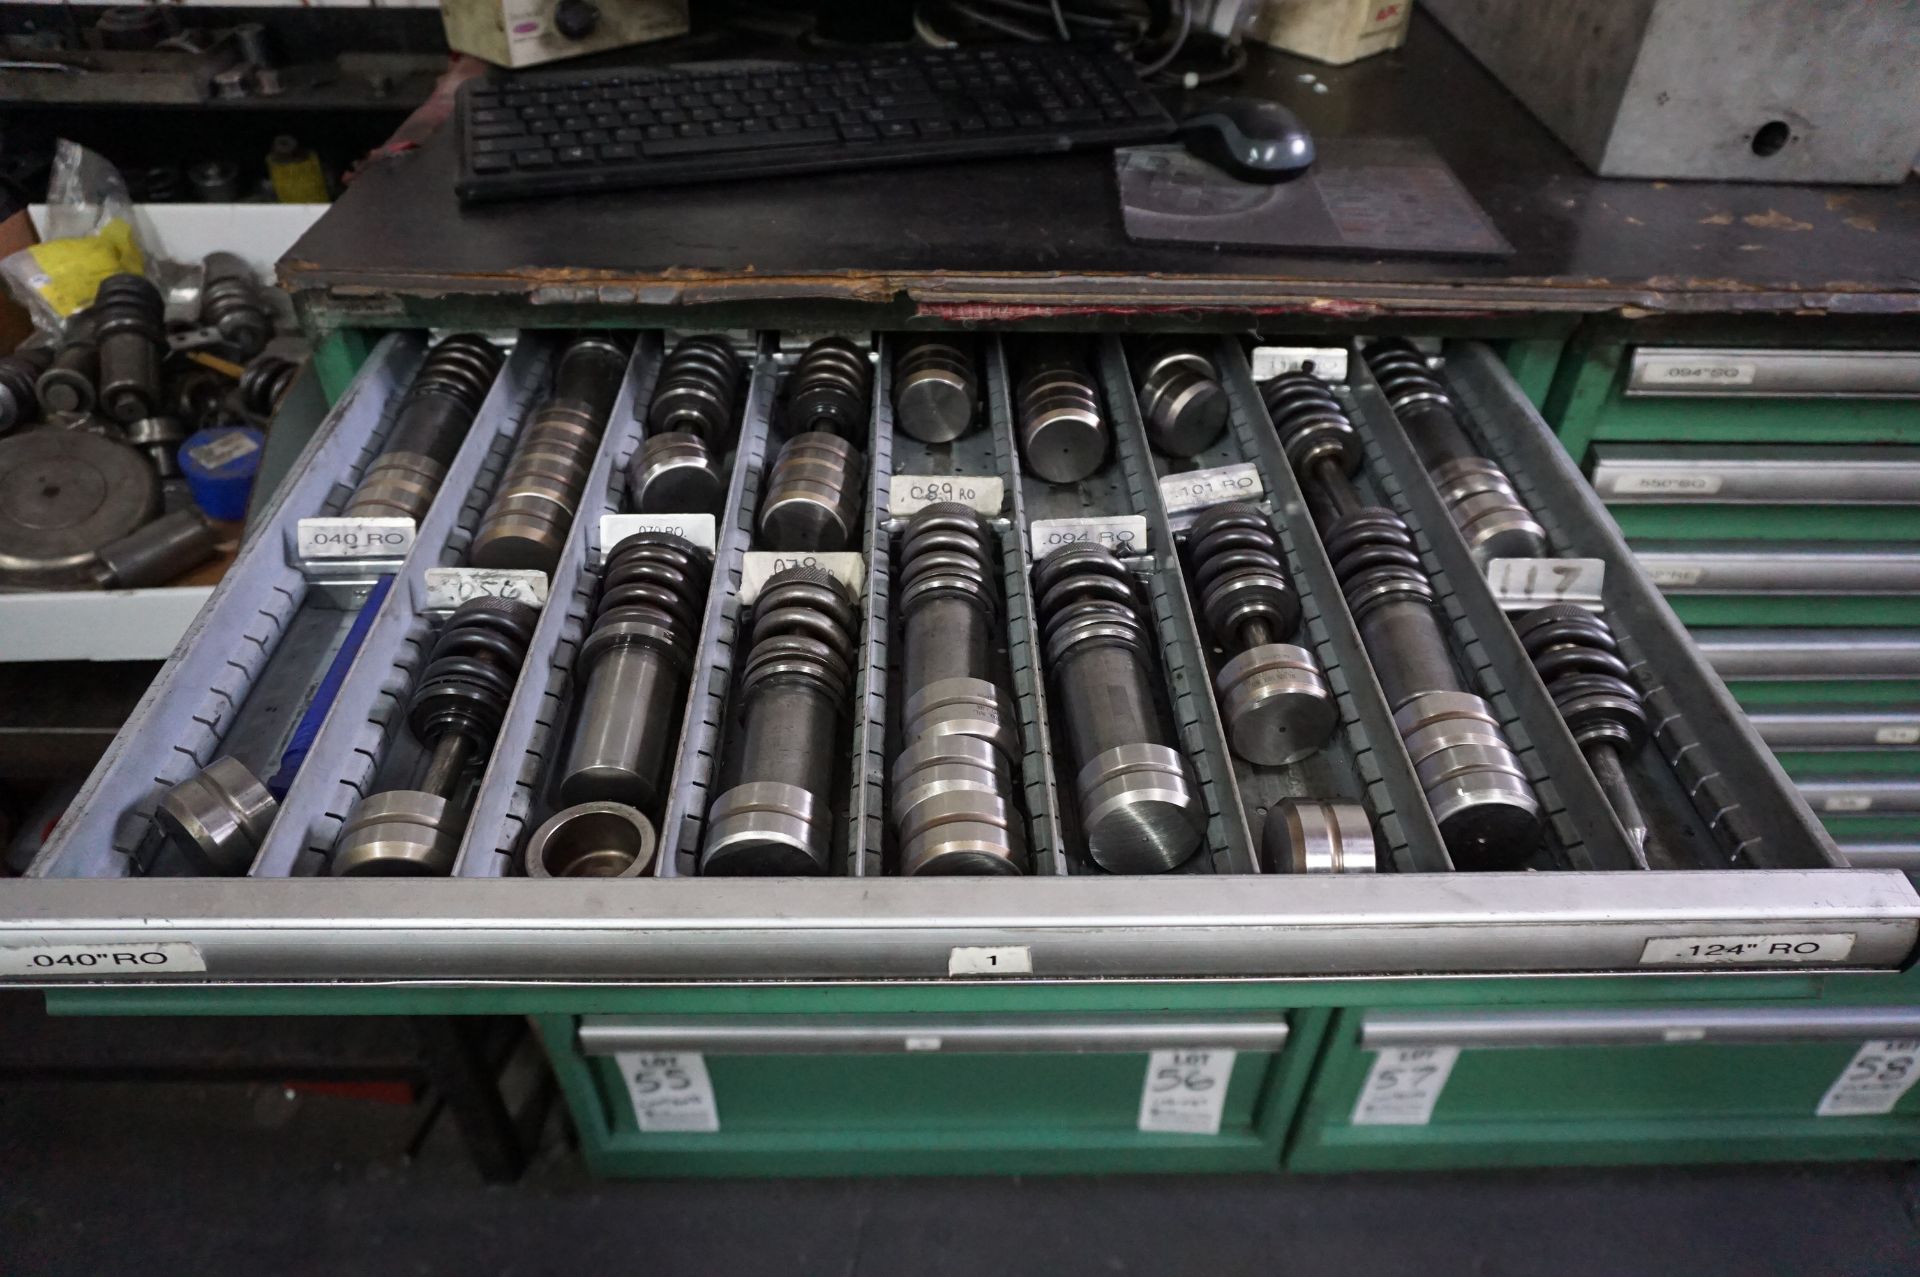 CONTENTS OF 9 DRAWER CABINET TO INCLUDE: .040" ROUND PUNCHES - 1.250" ROUND PUNCH TOOLING 1 1/4"